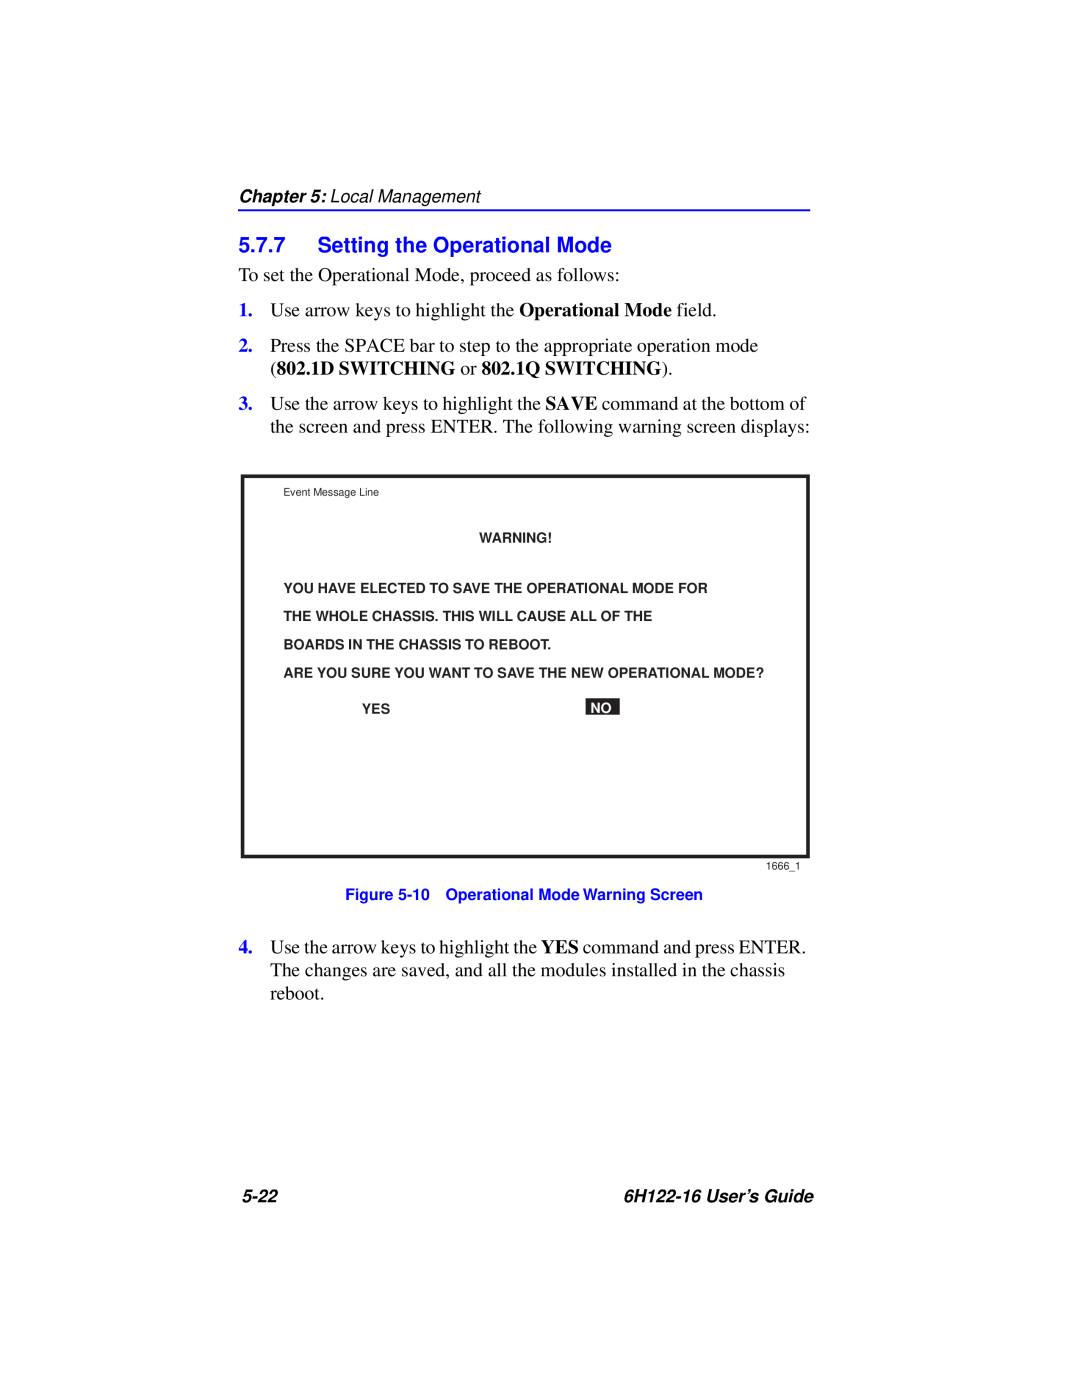 Cabletron Systems 6H122-16 manual Setting the Operational Mode 